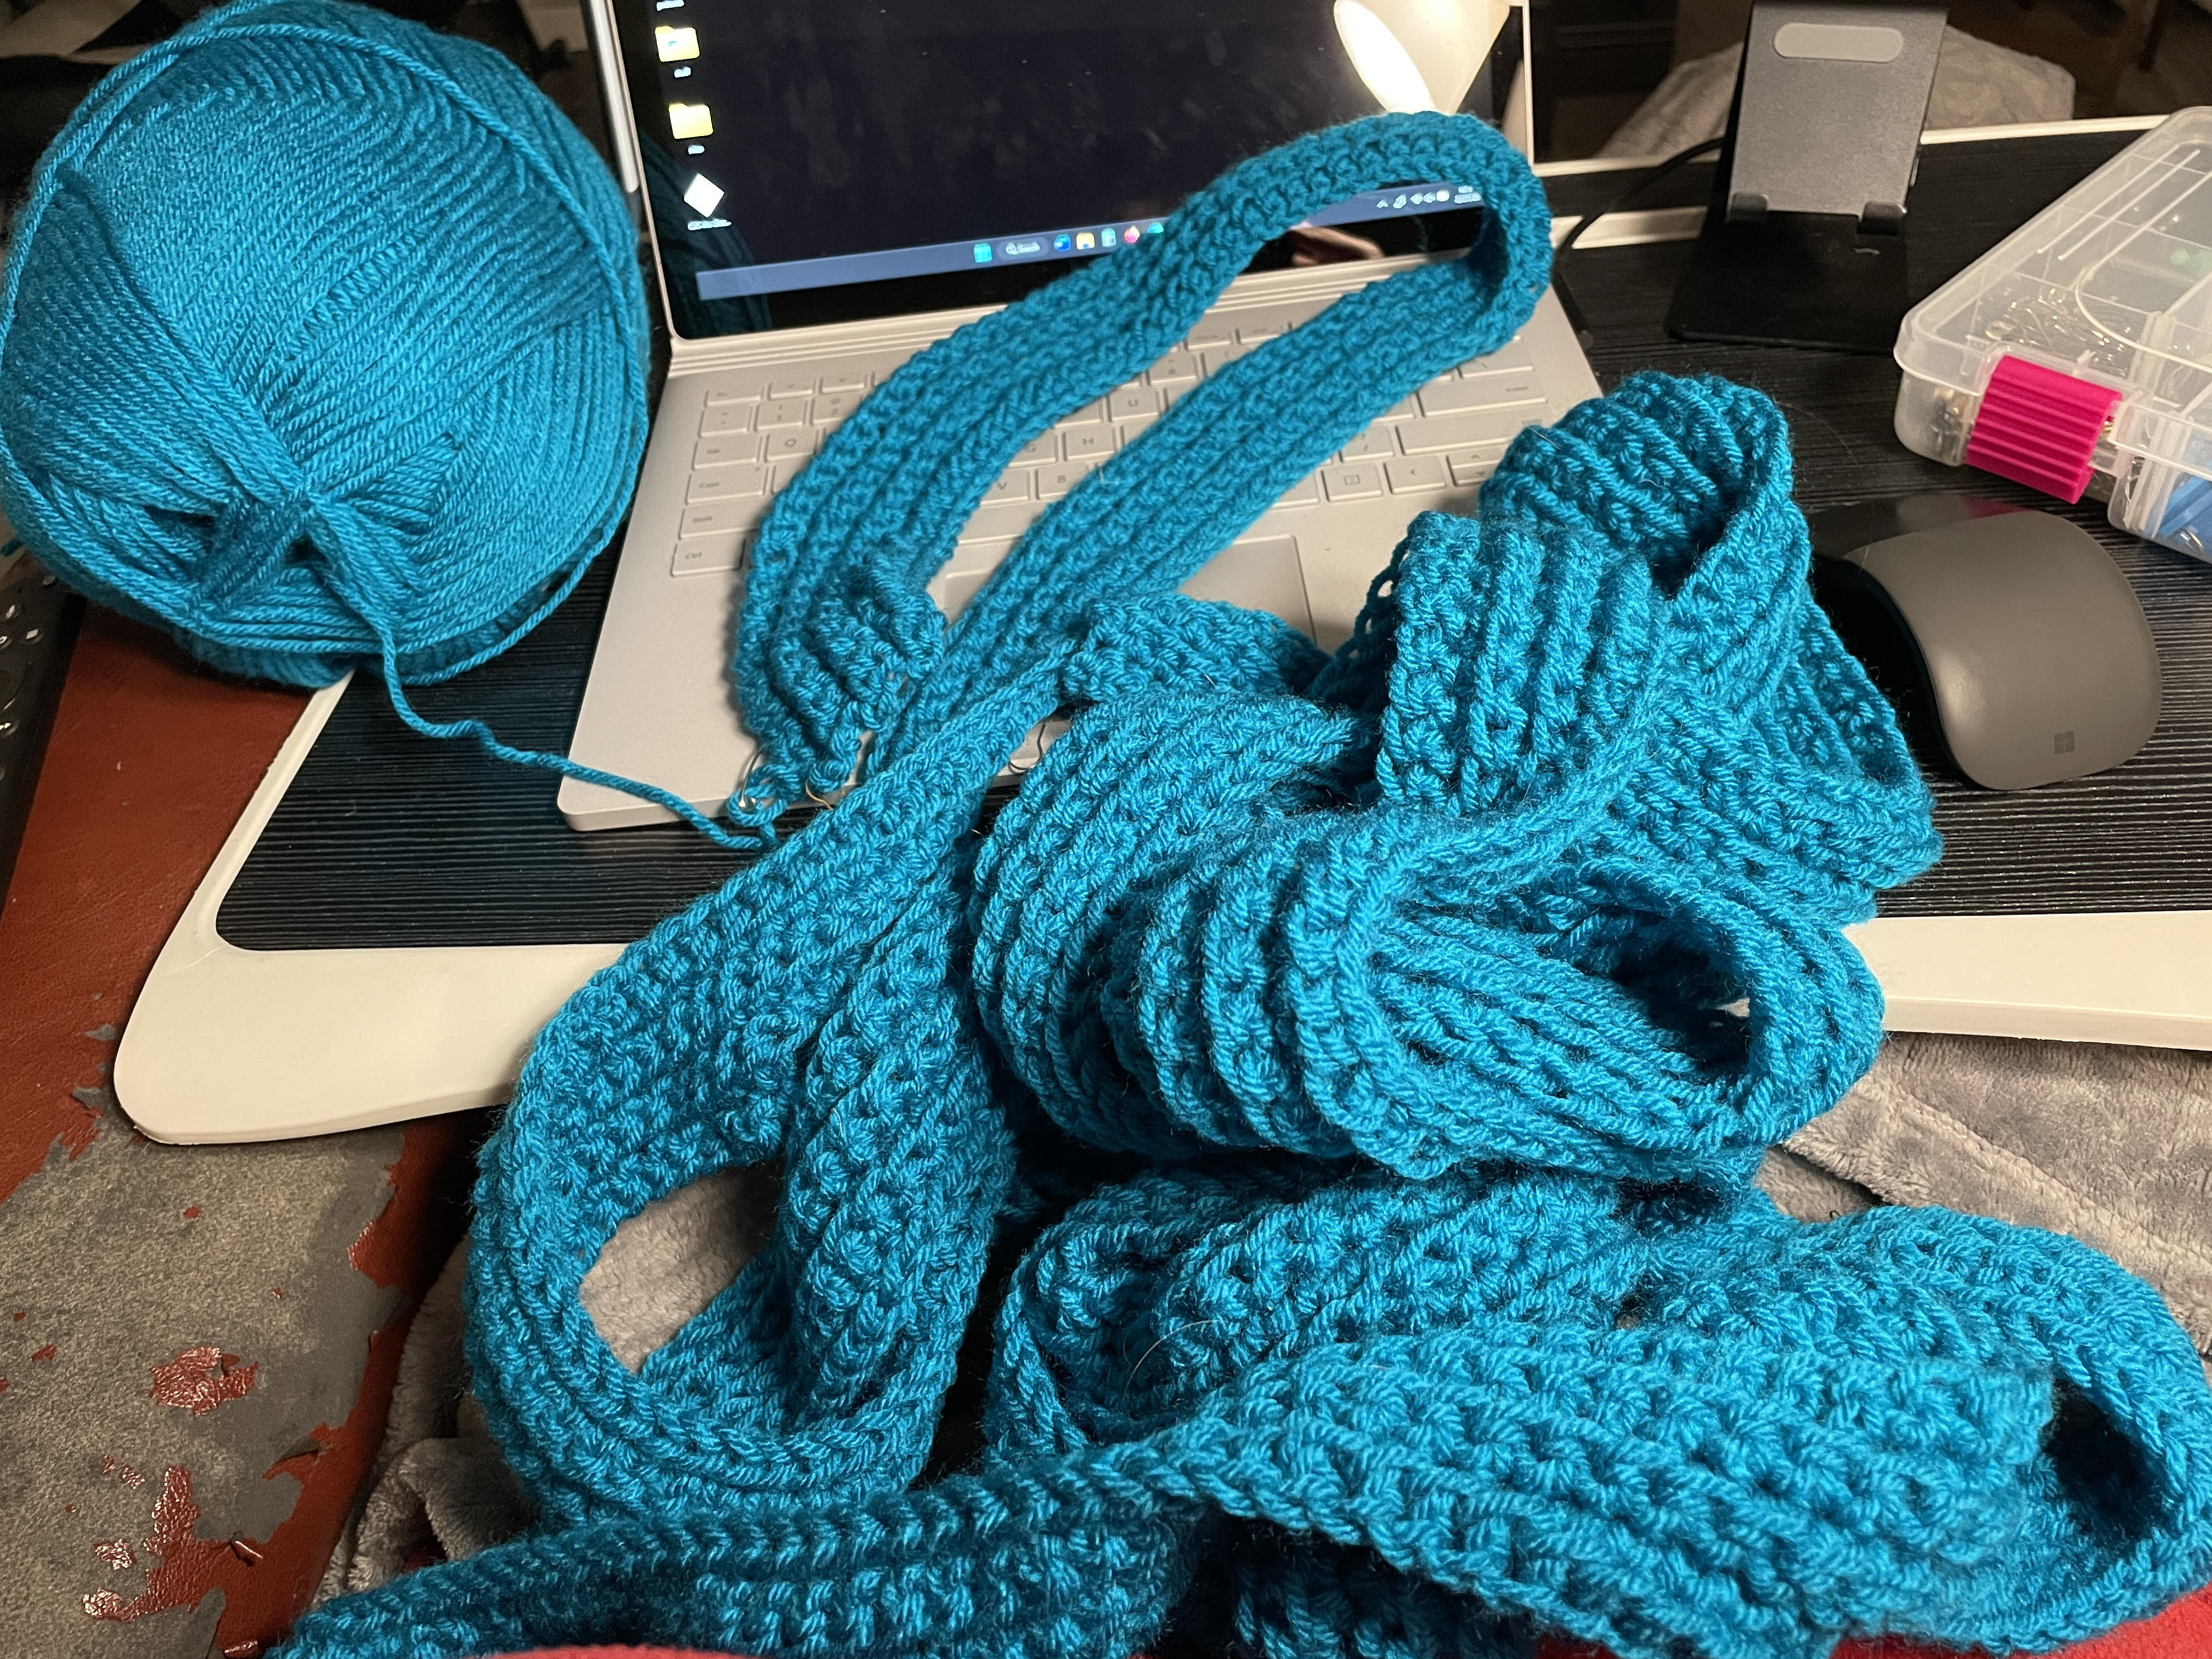 Update on the Fantasy Hooded shawl